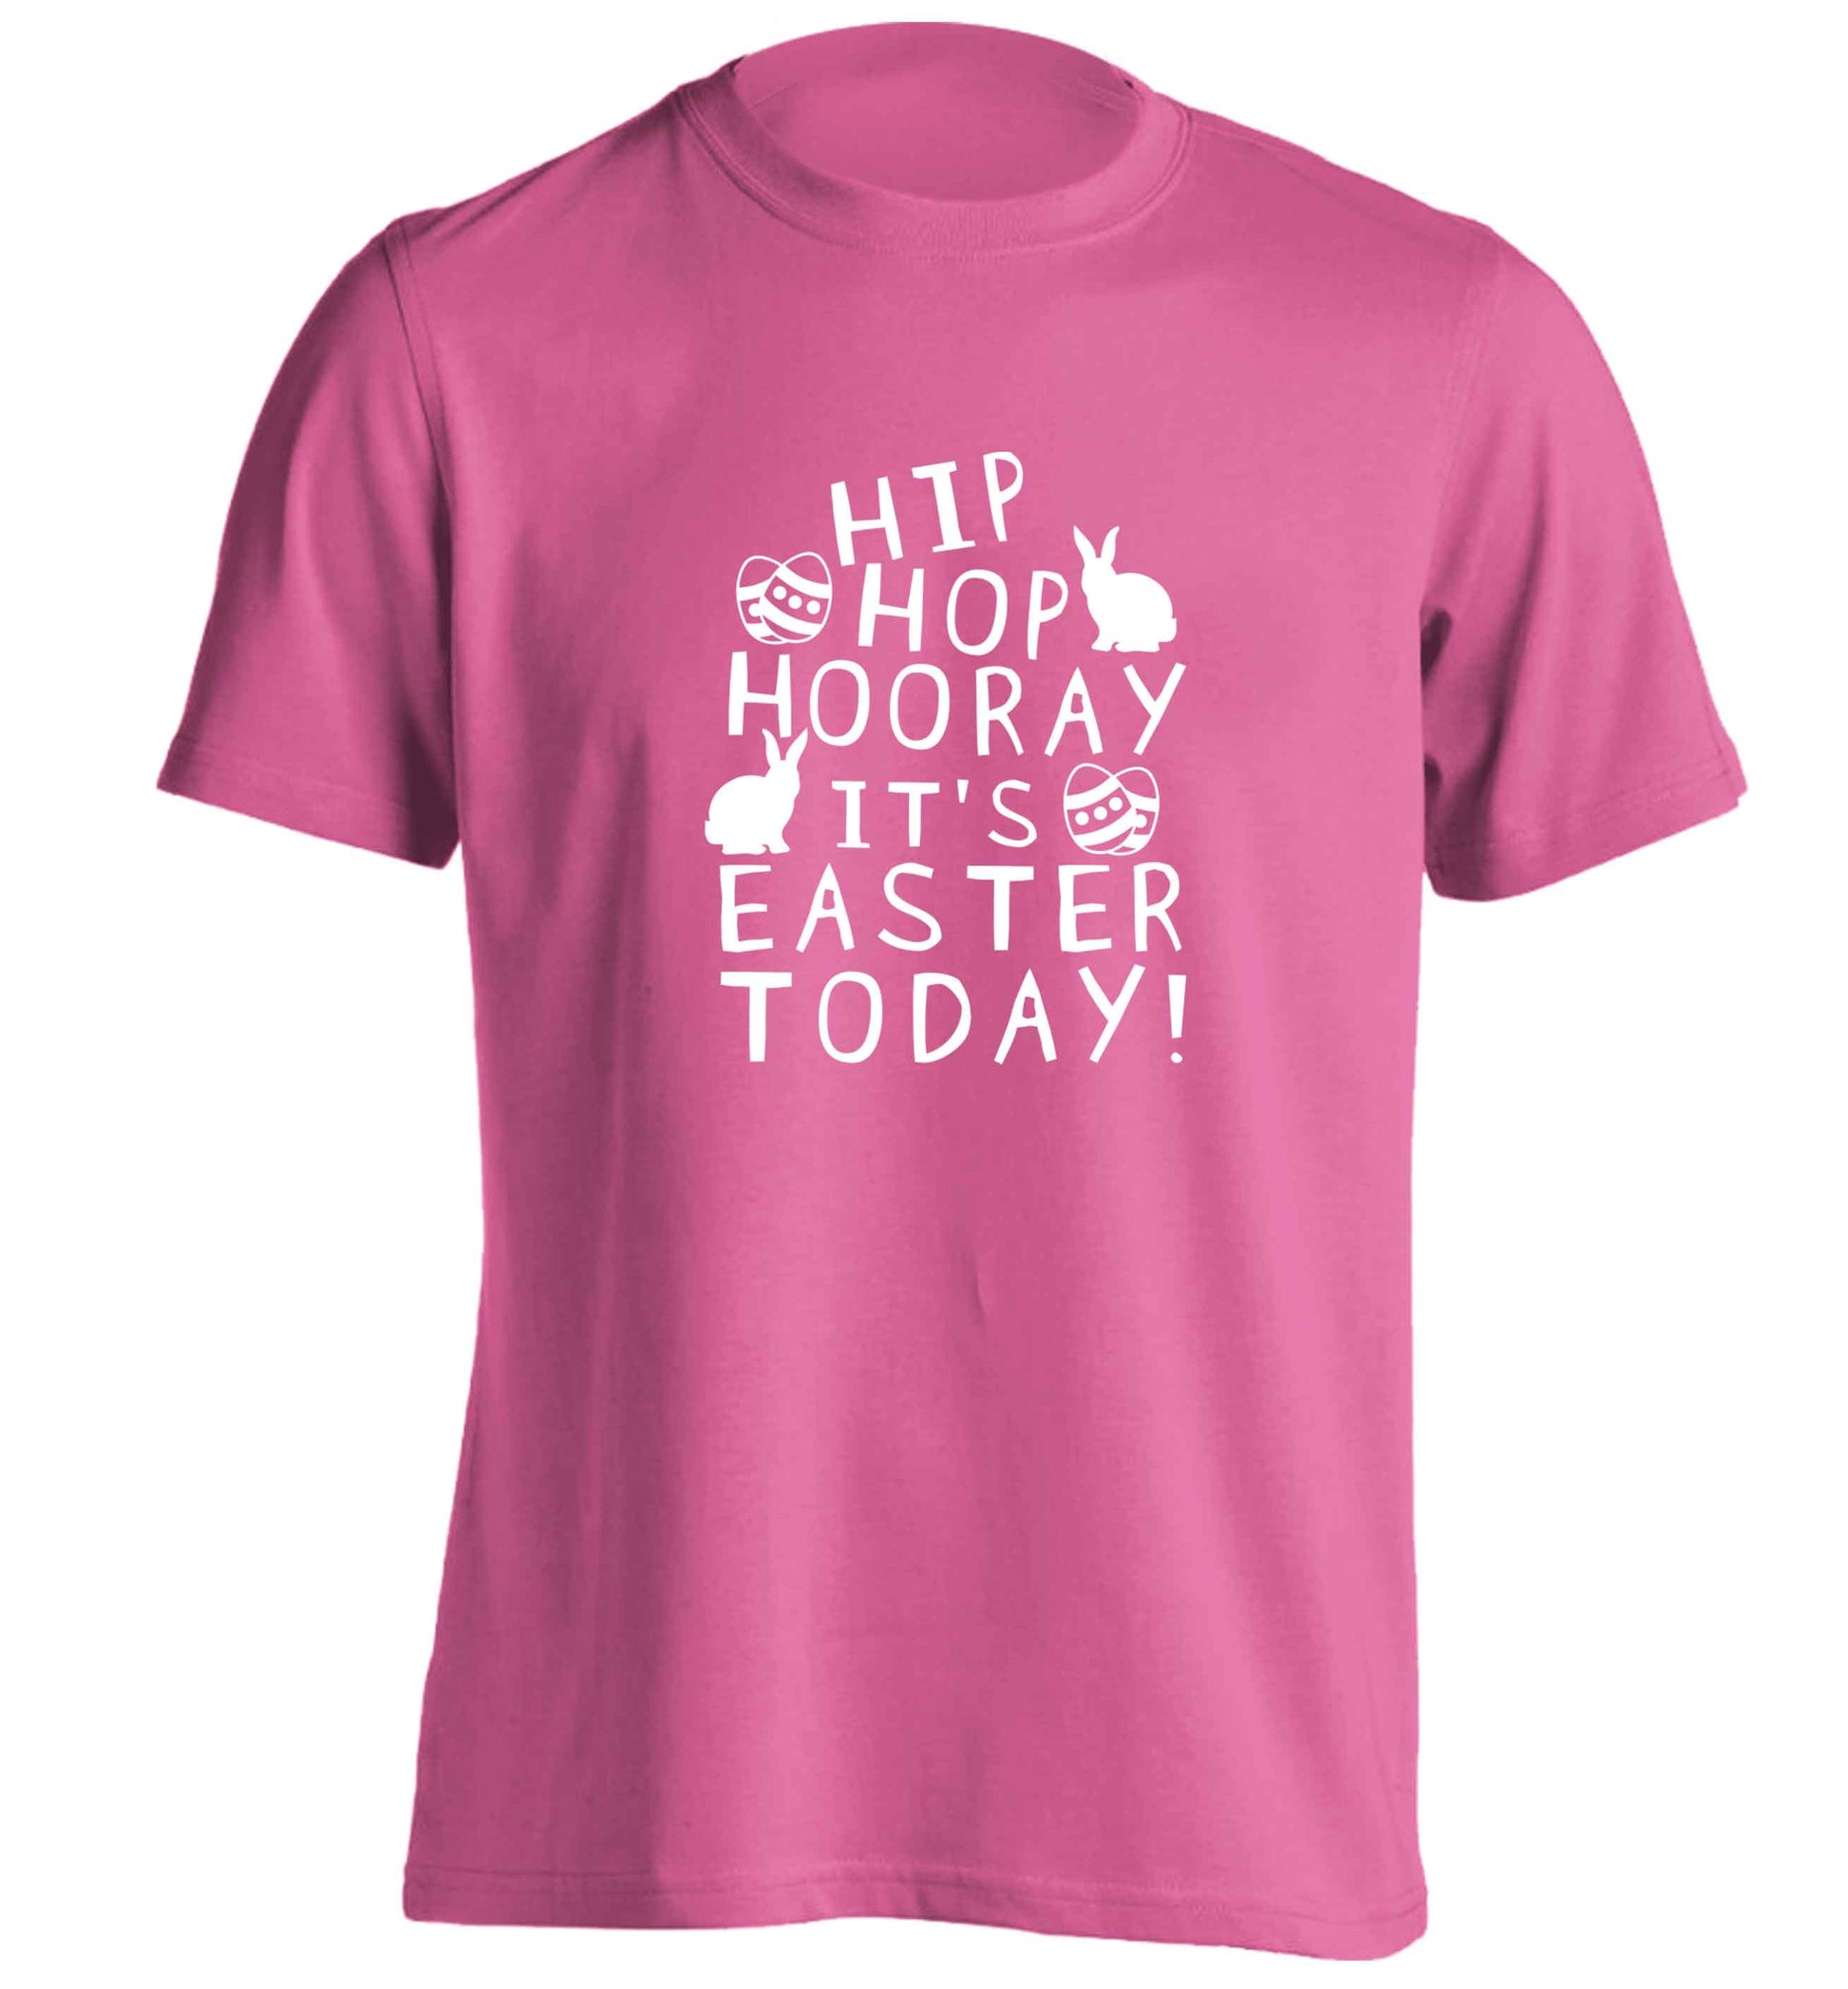 Hip hip hooray it's Easter today! adults unisex pink Tshirt 2XL